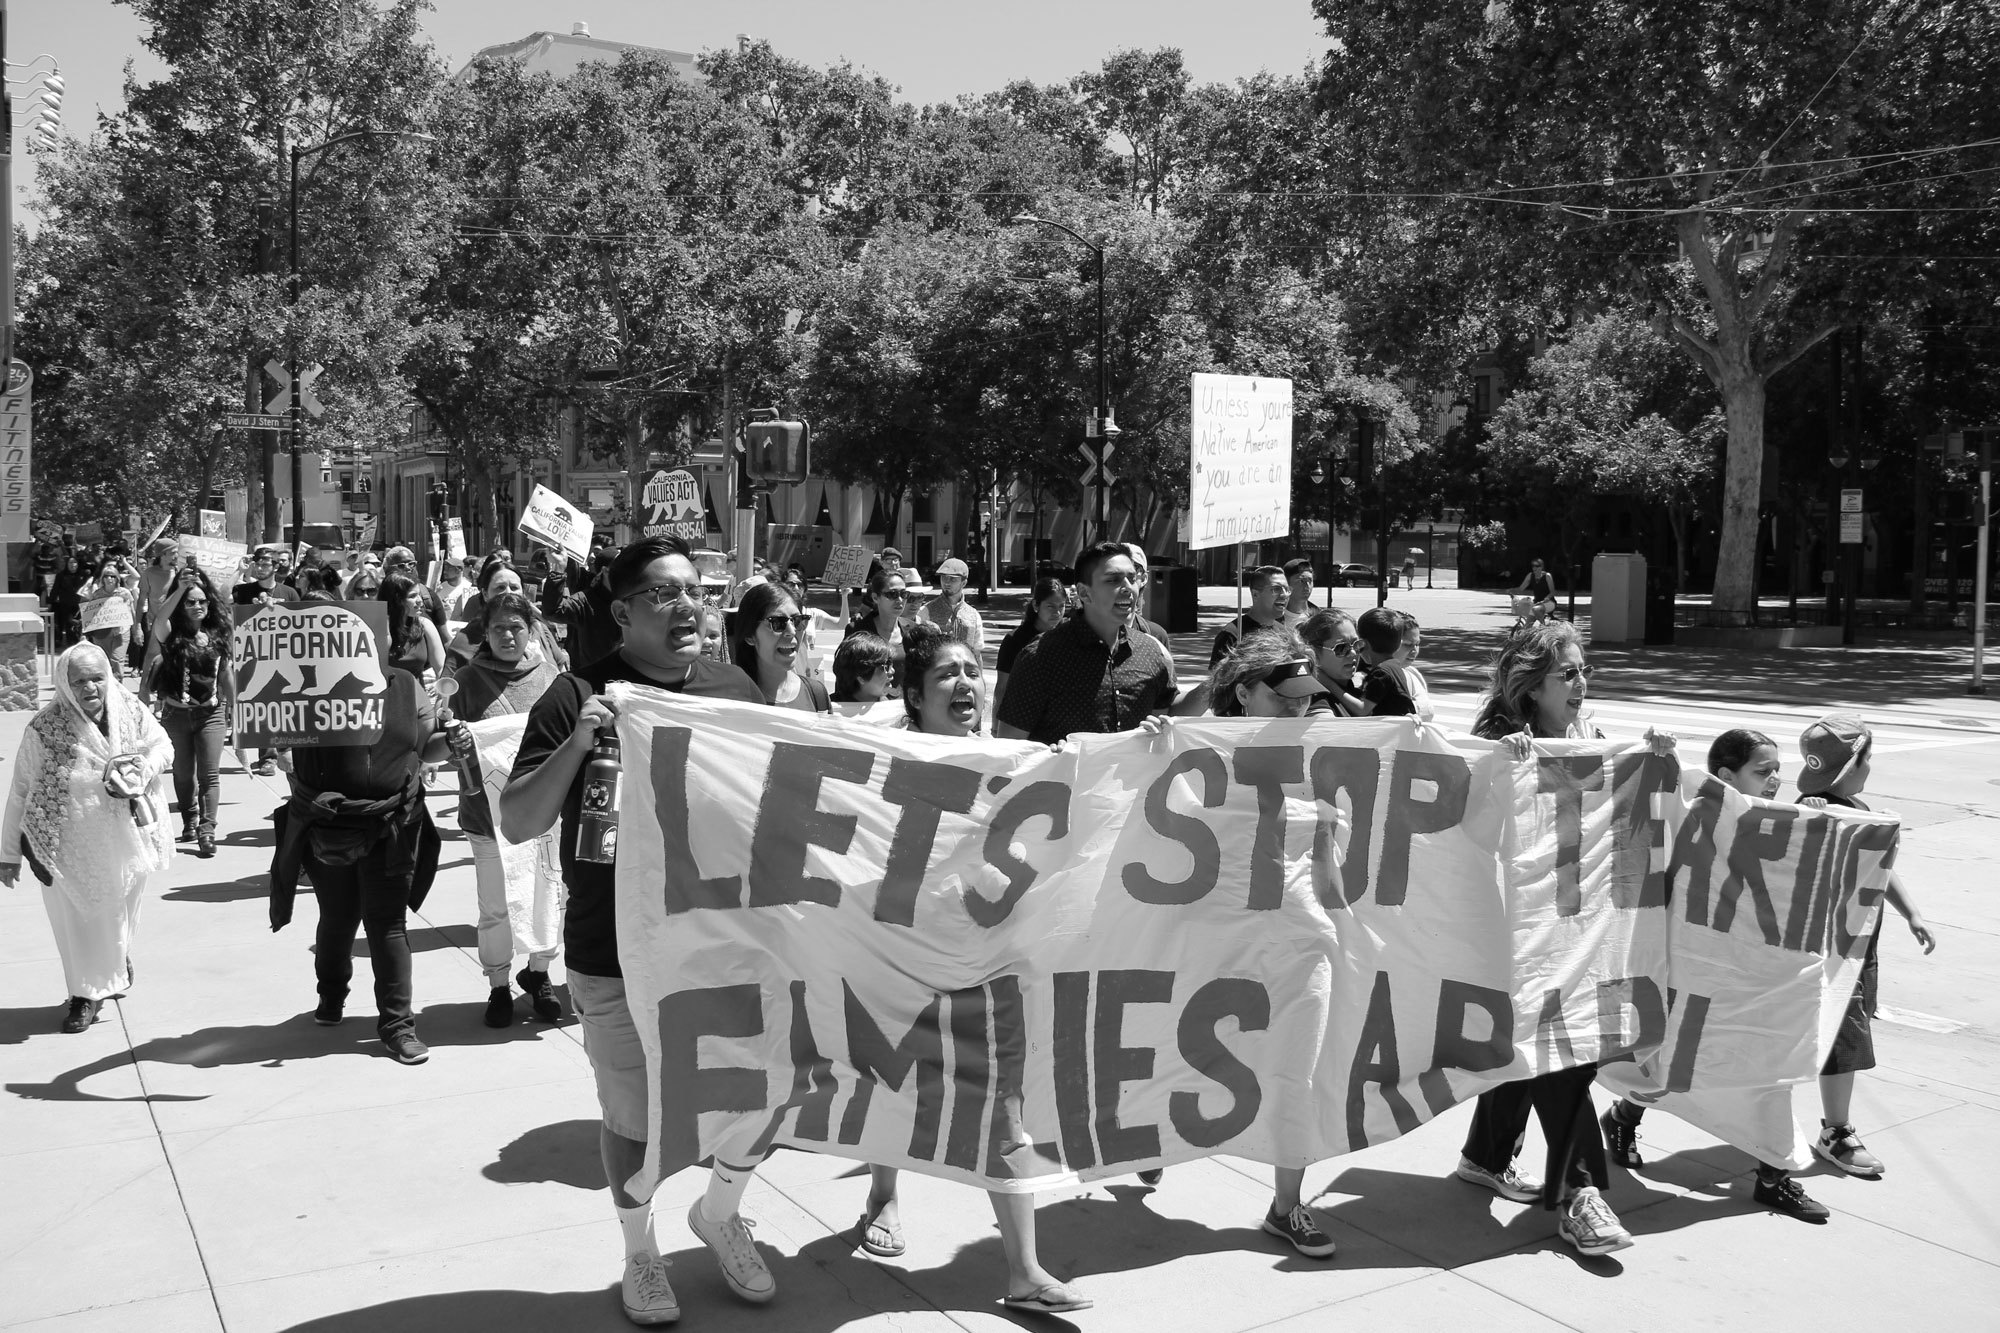 Black and white image of people holding banner reading "let's stop tearing families apart" followed by other protestors